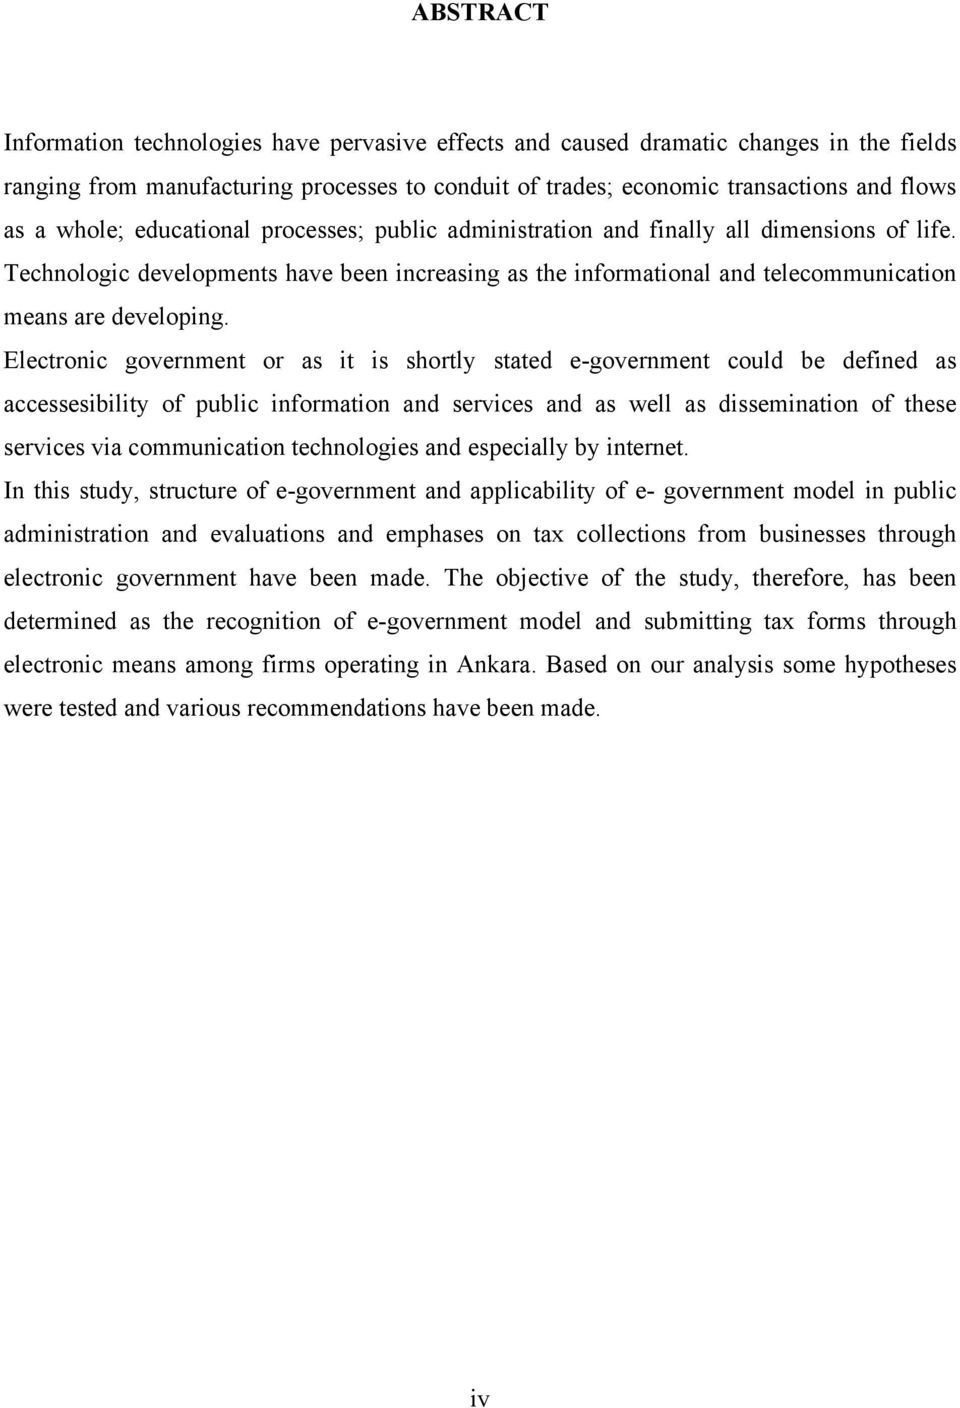 Electronic government or as it is shortly stated e-government could be defined as accessesibility of public information and services and as well as dissemination of these services via communication